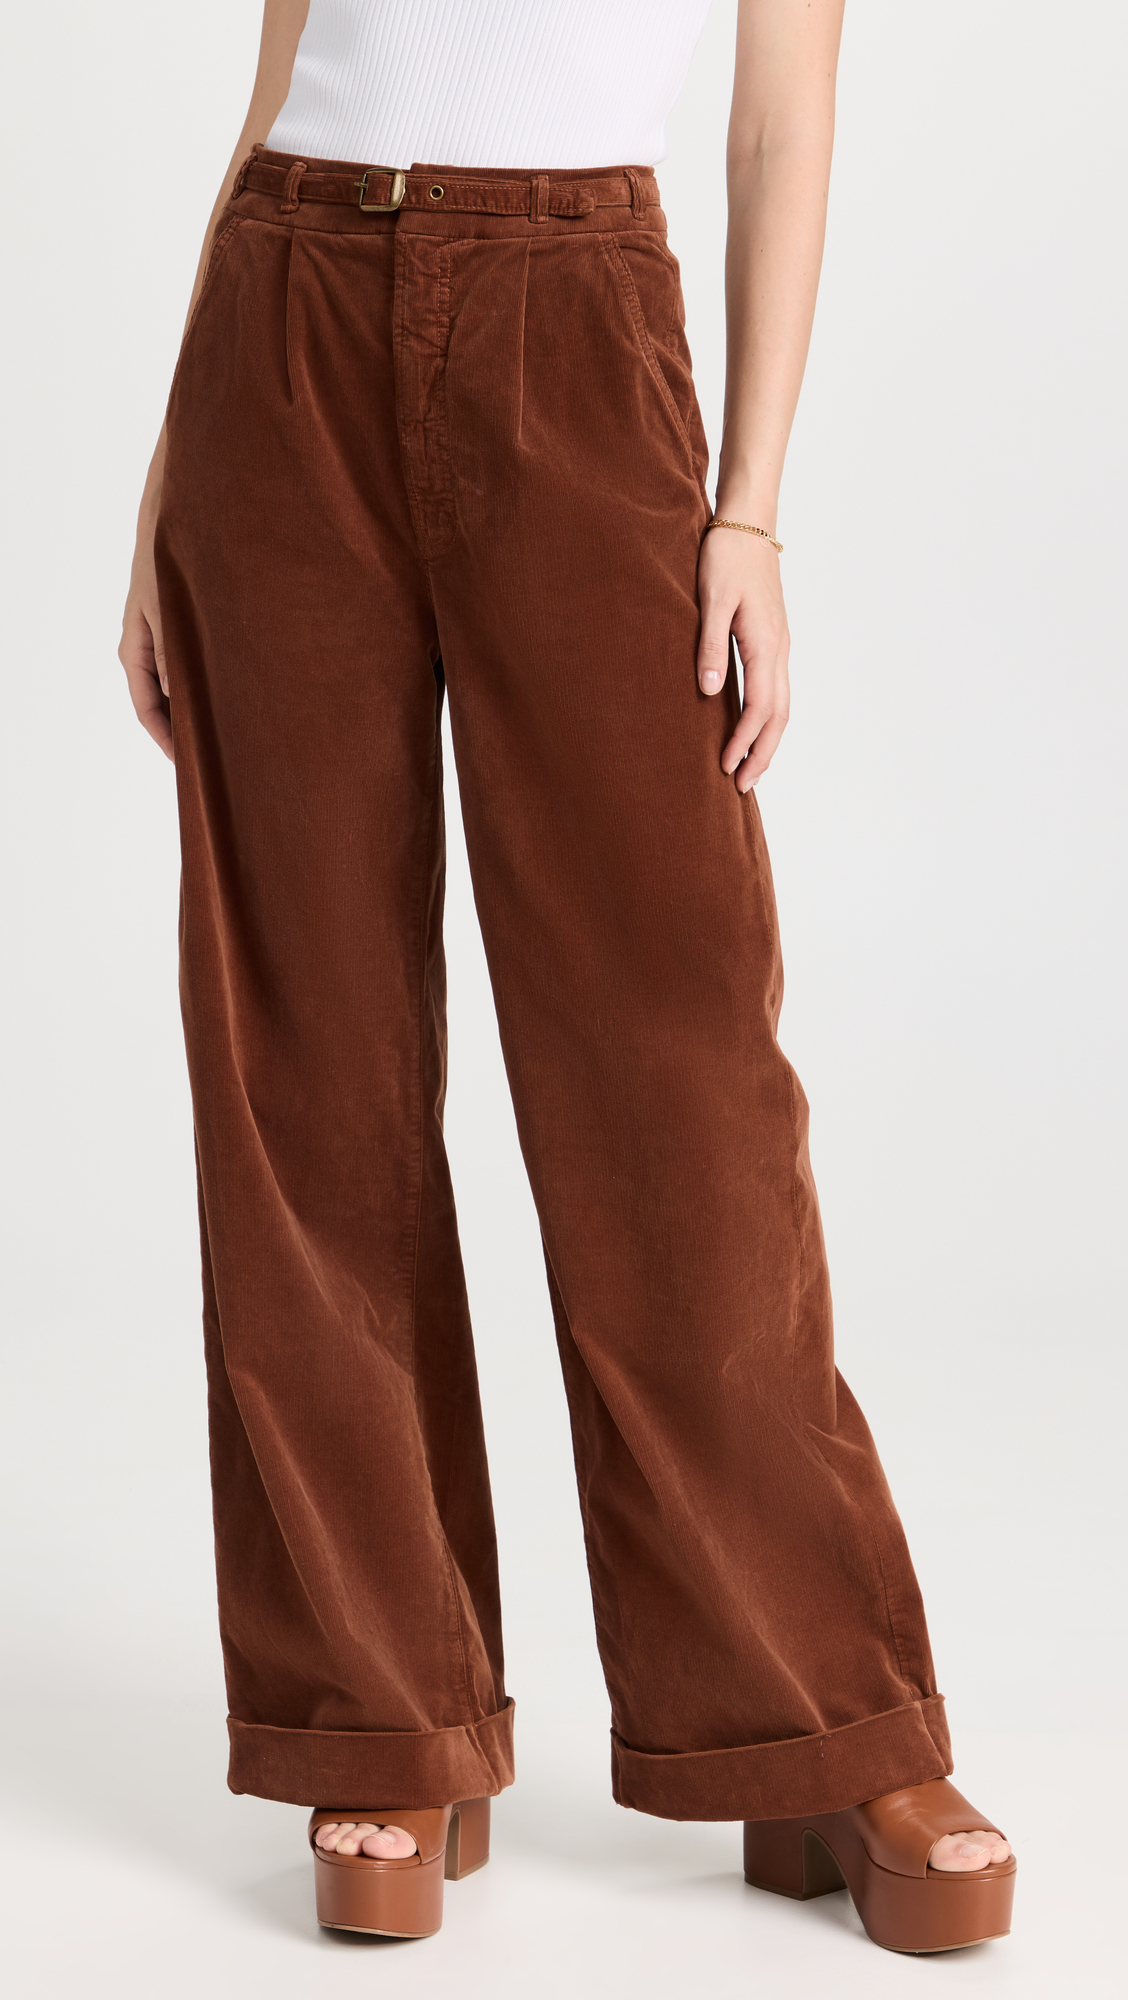 31 Best Pleated Pants for Women 2022 | Who What Wear